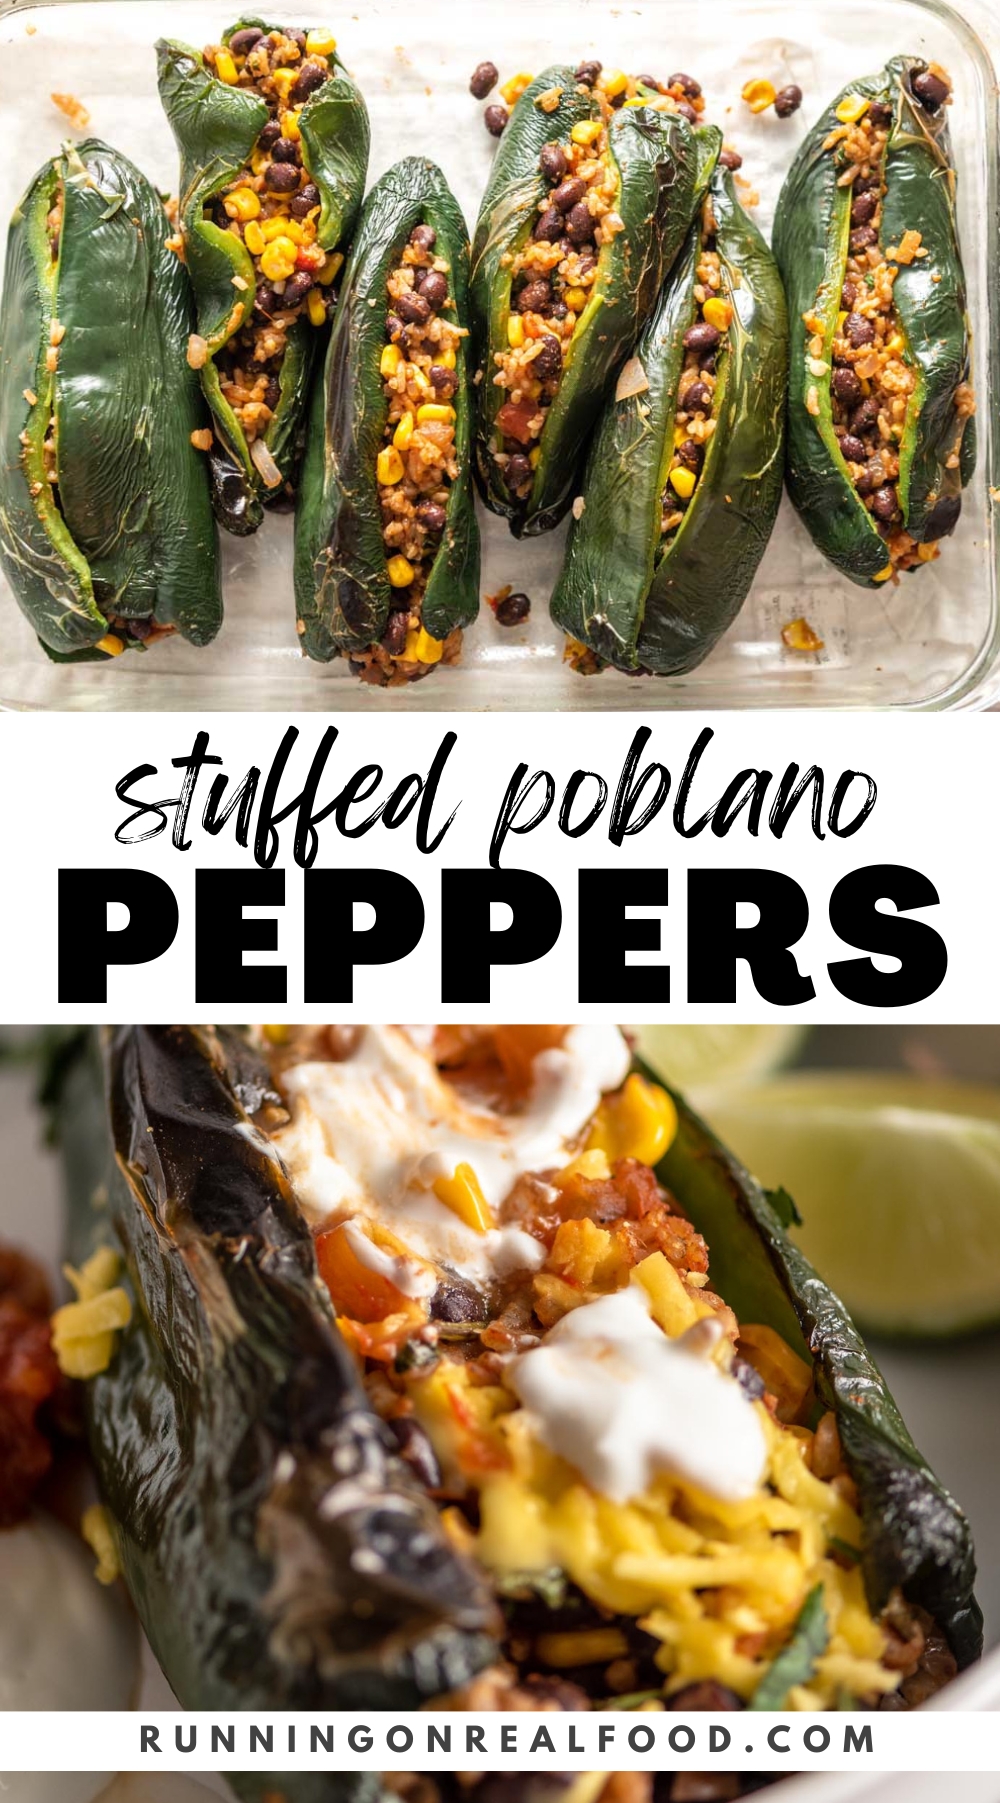 Pinterest graphic for vegan stuffed poblano peppers with 2 images and a stylized text title.